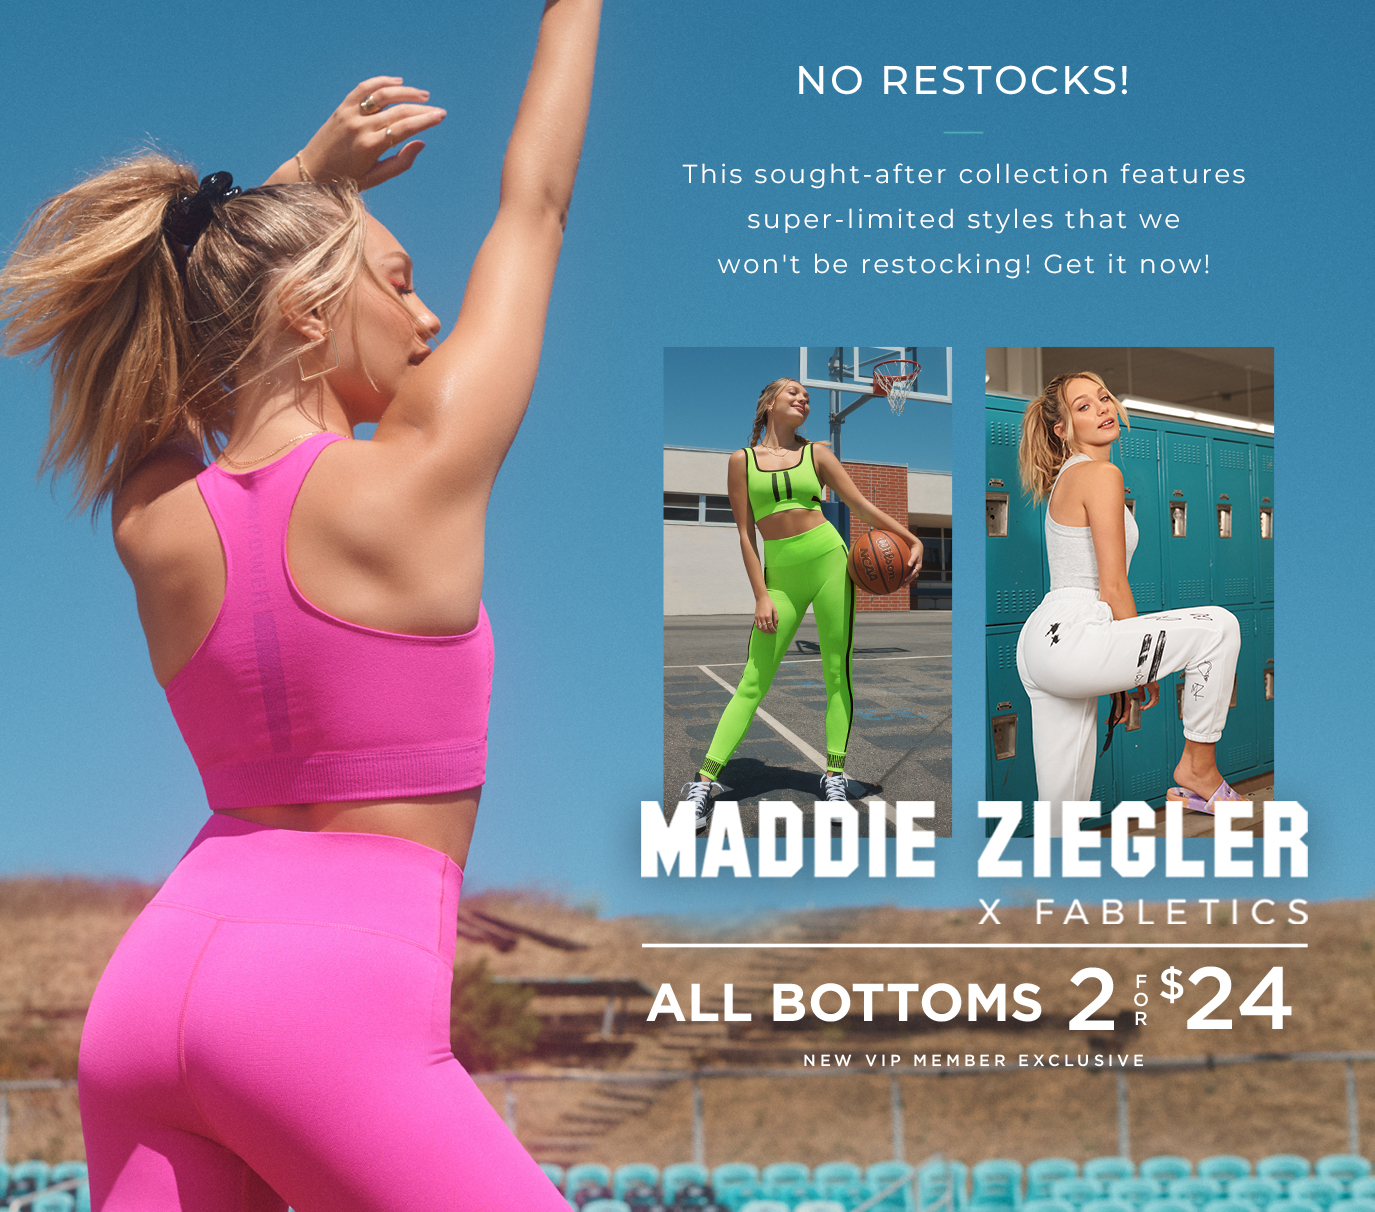 2 for $24 Bottoms